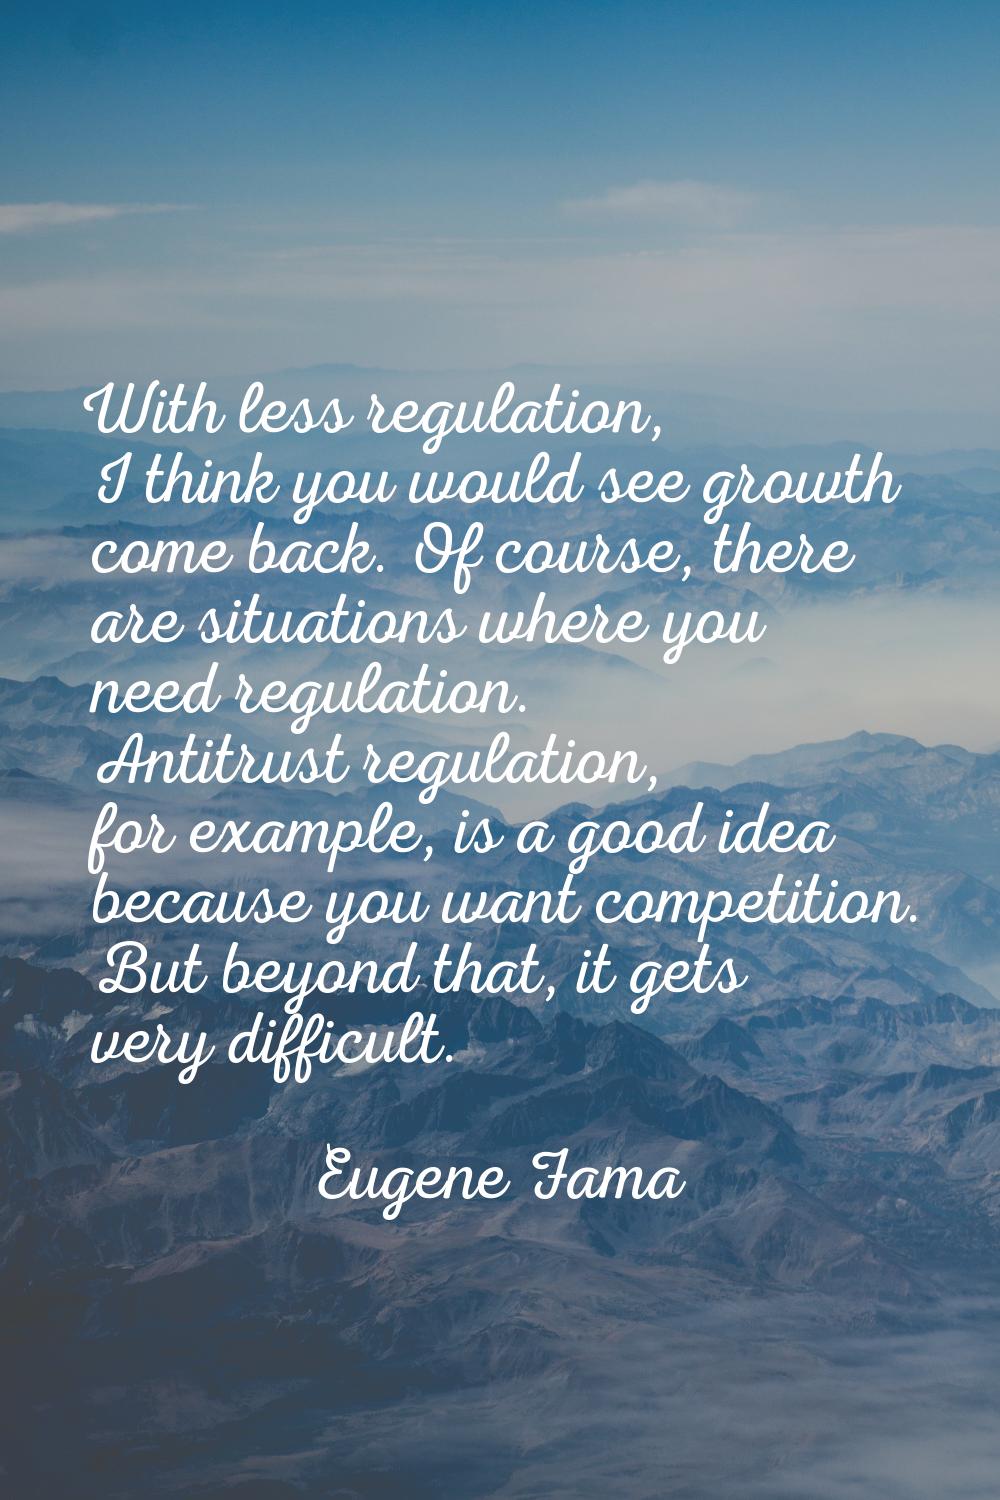 With less regulation, I think you would see growth come back. Of course, there are situations where